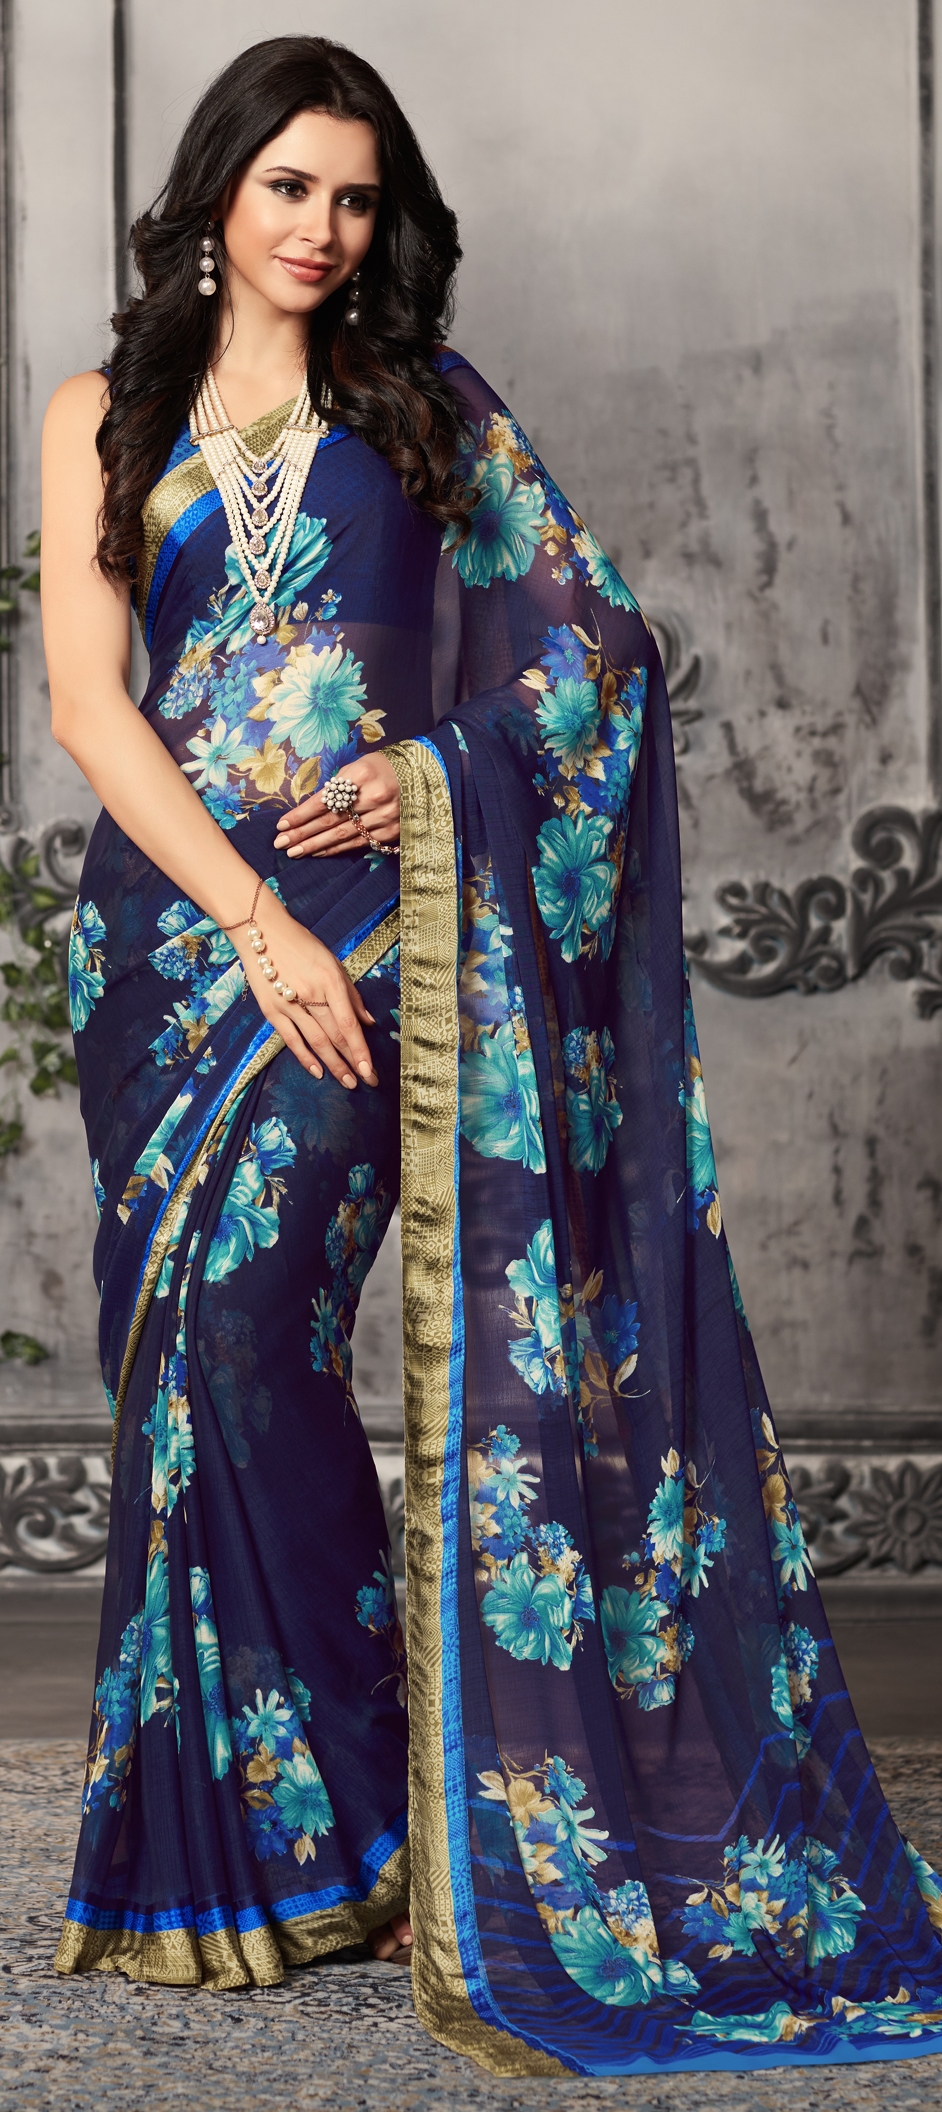 branded printed sarees Archives